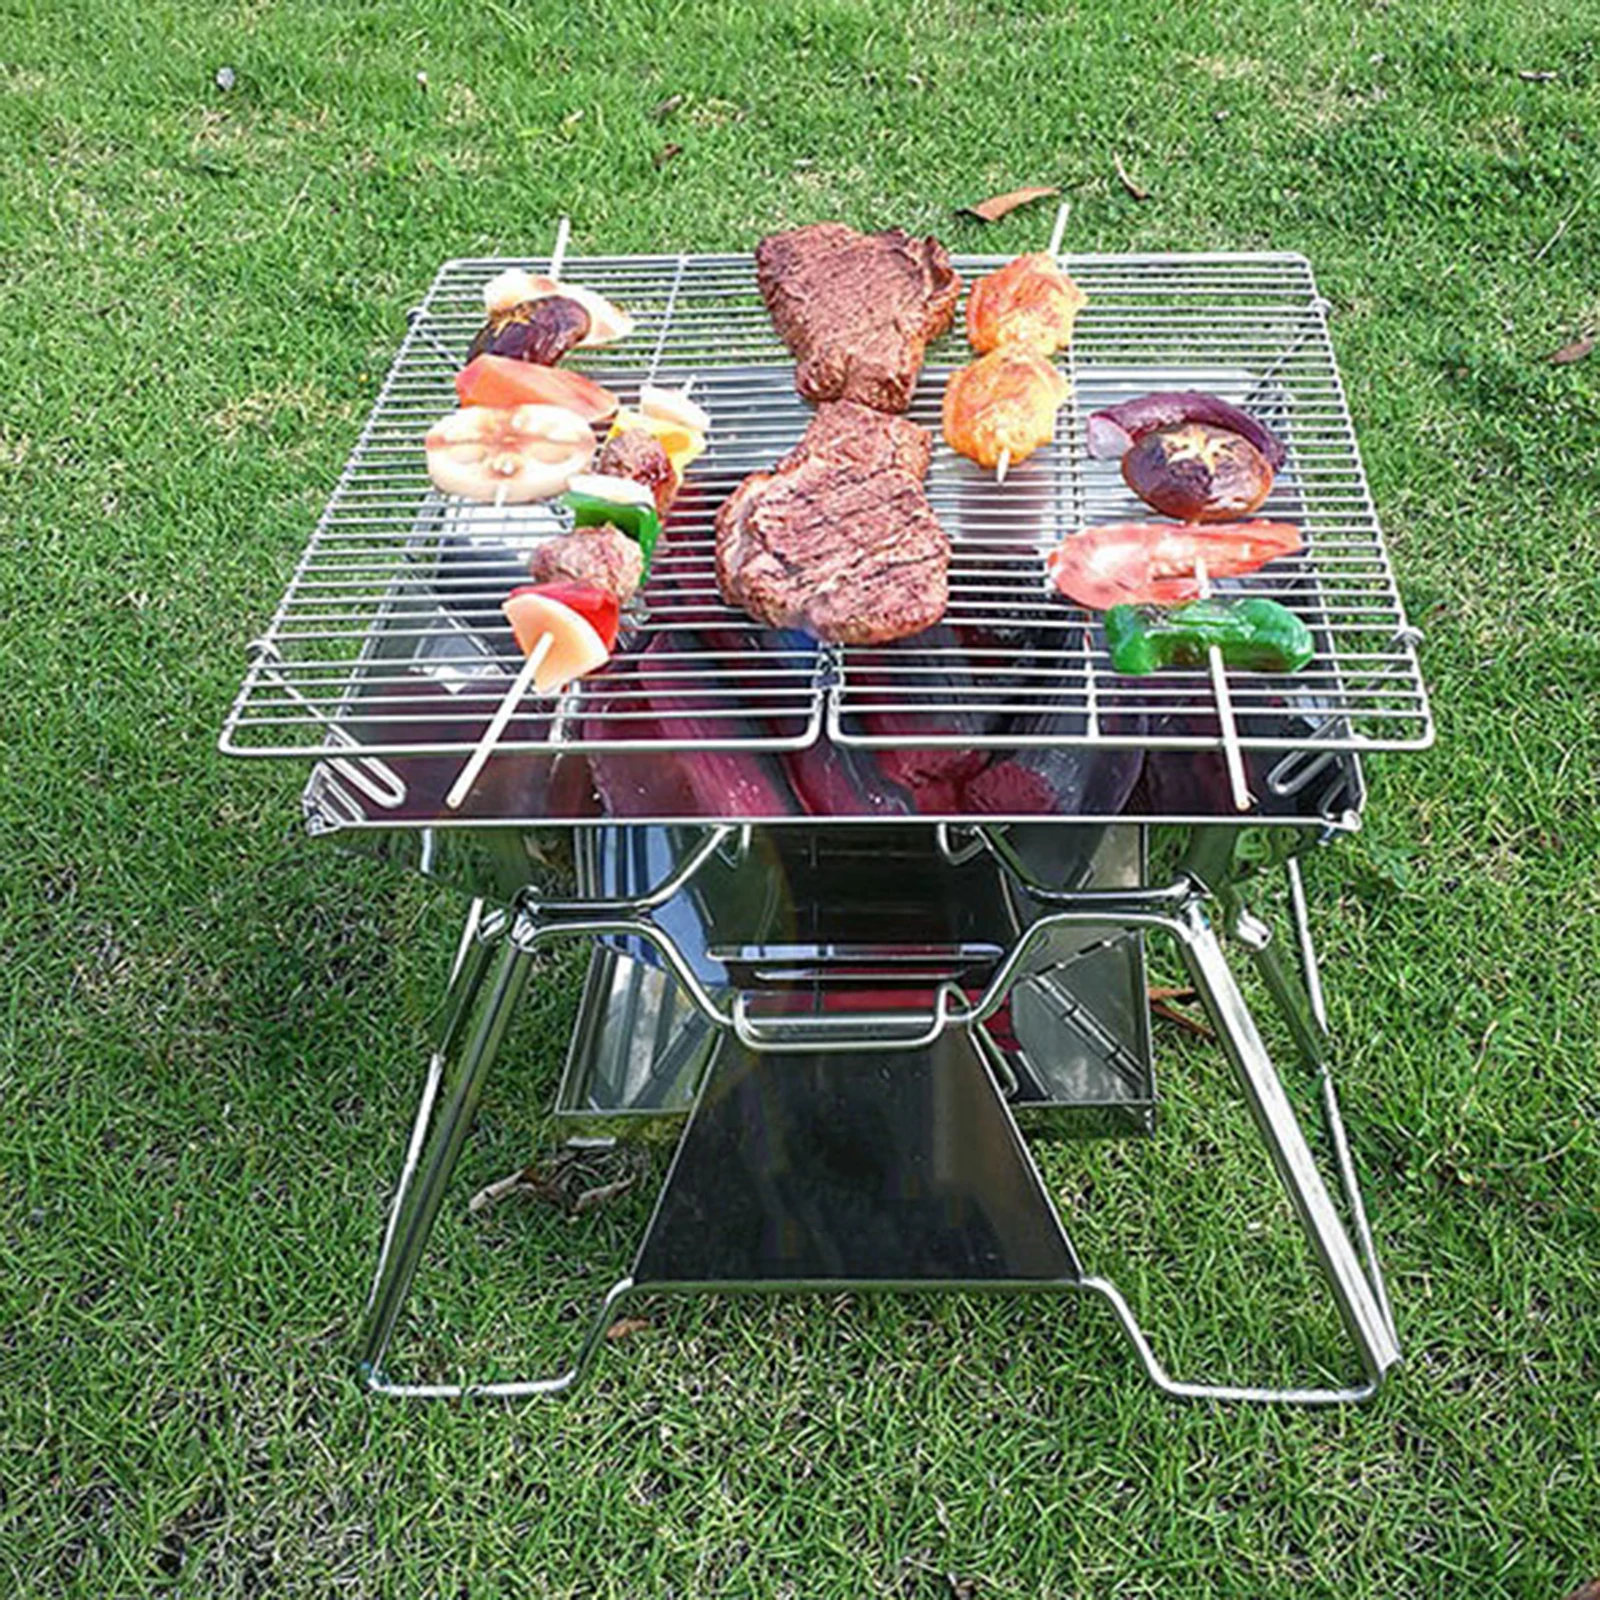 

Large Portable Folding BBQ Grill Stove Campingmoon MT-3 4-5 Person MT-2 2-3 Person Outdoor BBQ Rack 34x35cm